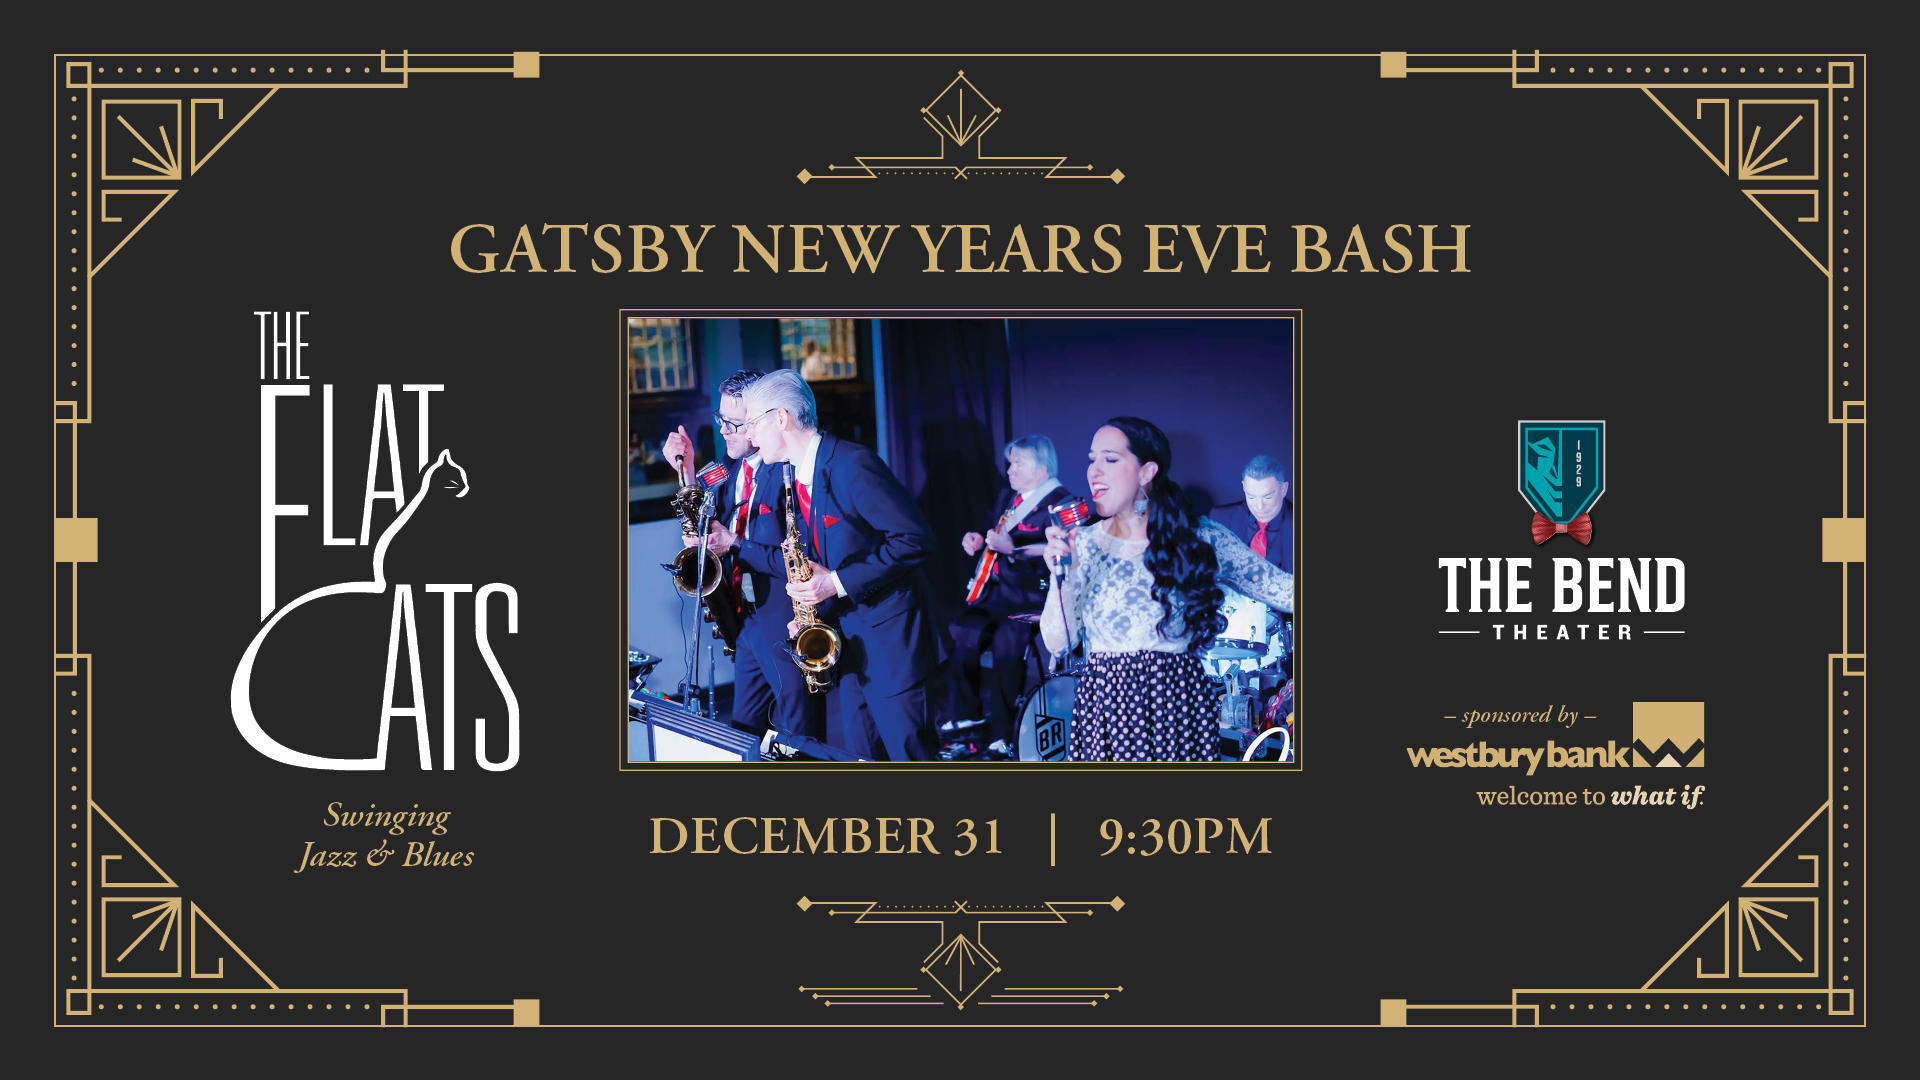 The Bend's Gatsby New Year's Eve Bash ft. The Flat Cats